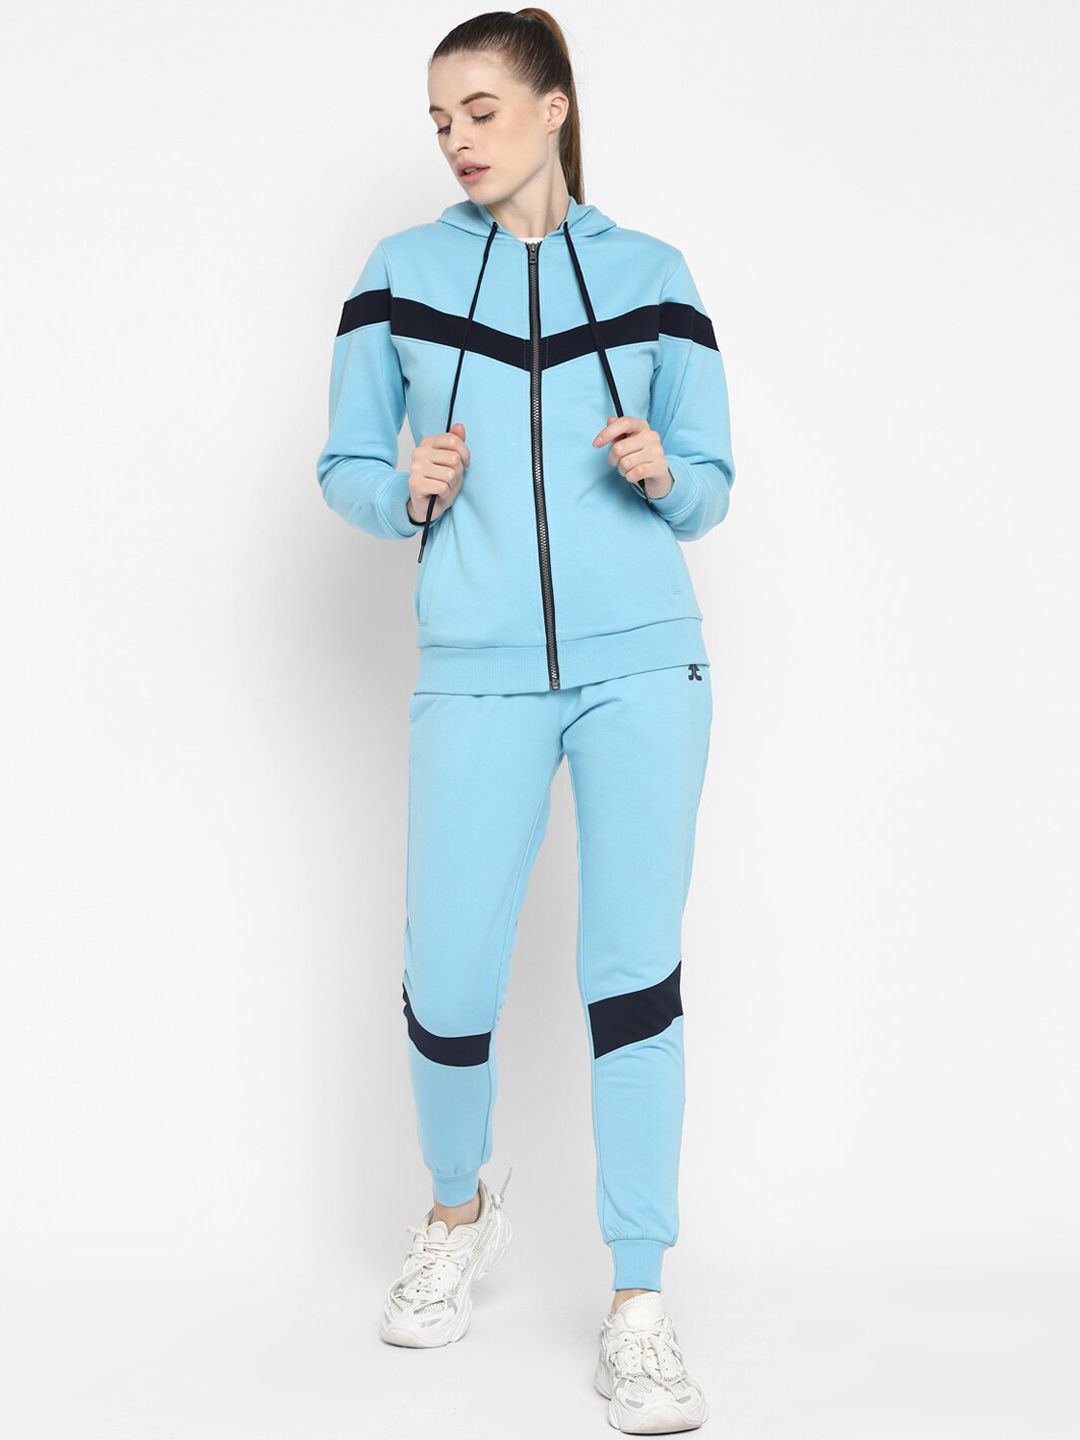 OFF LIMITS Women Blue & Black Solid Tracksuits Price in India